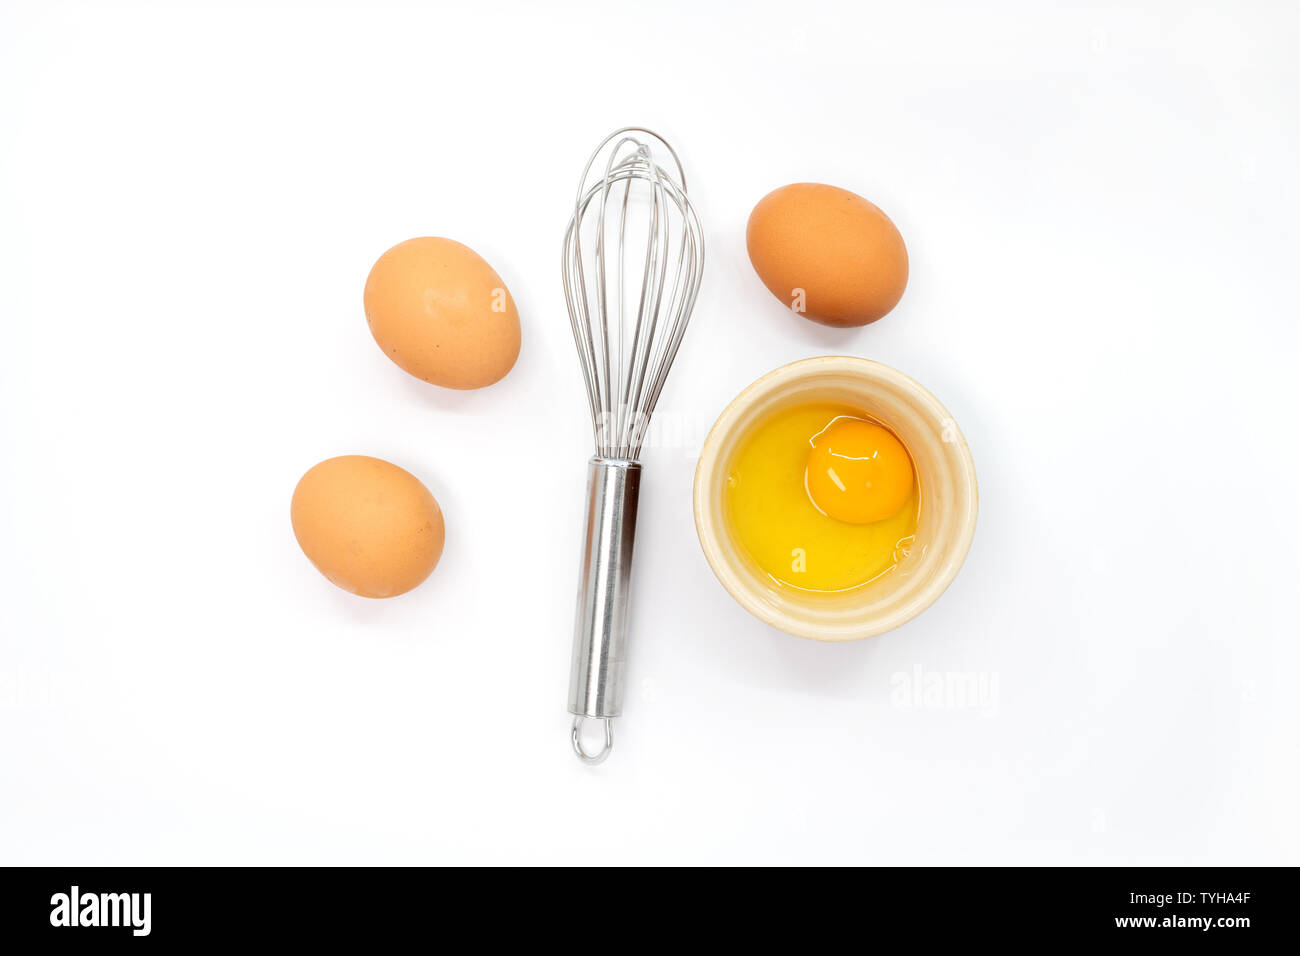 Eggs, a whisk and one egg yolk on a white background Stock Photo